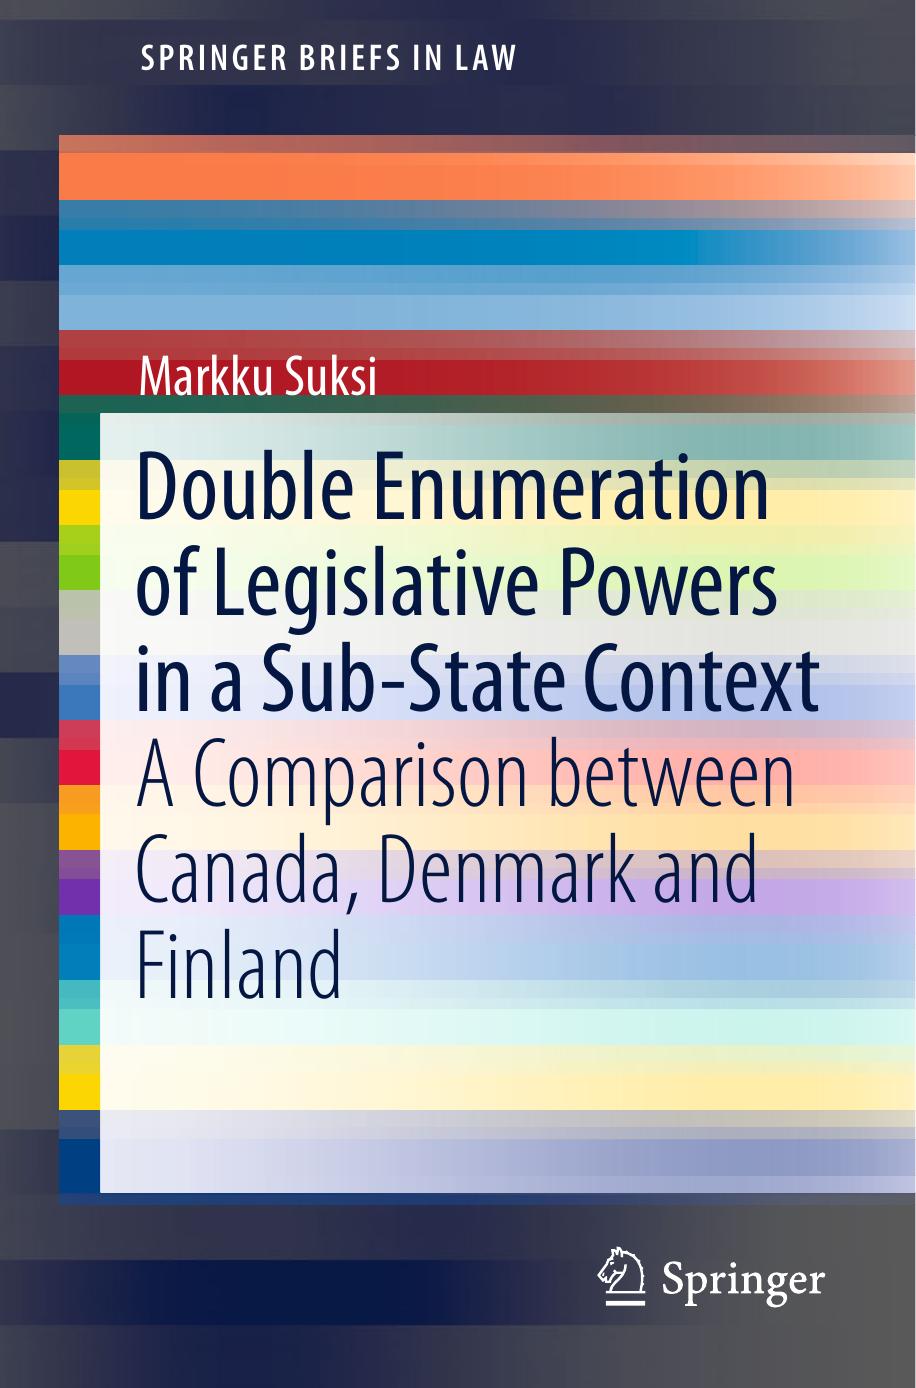 Double Enumeration of Legislative Powers in a Sub-State Context by Markku Suksi